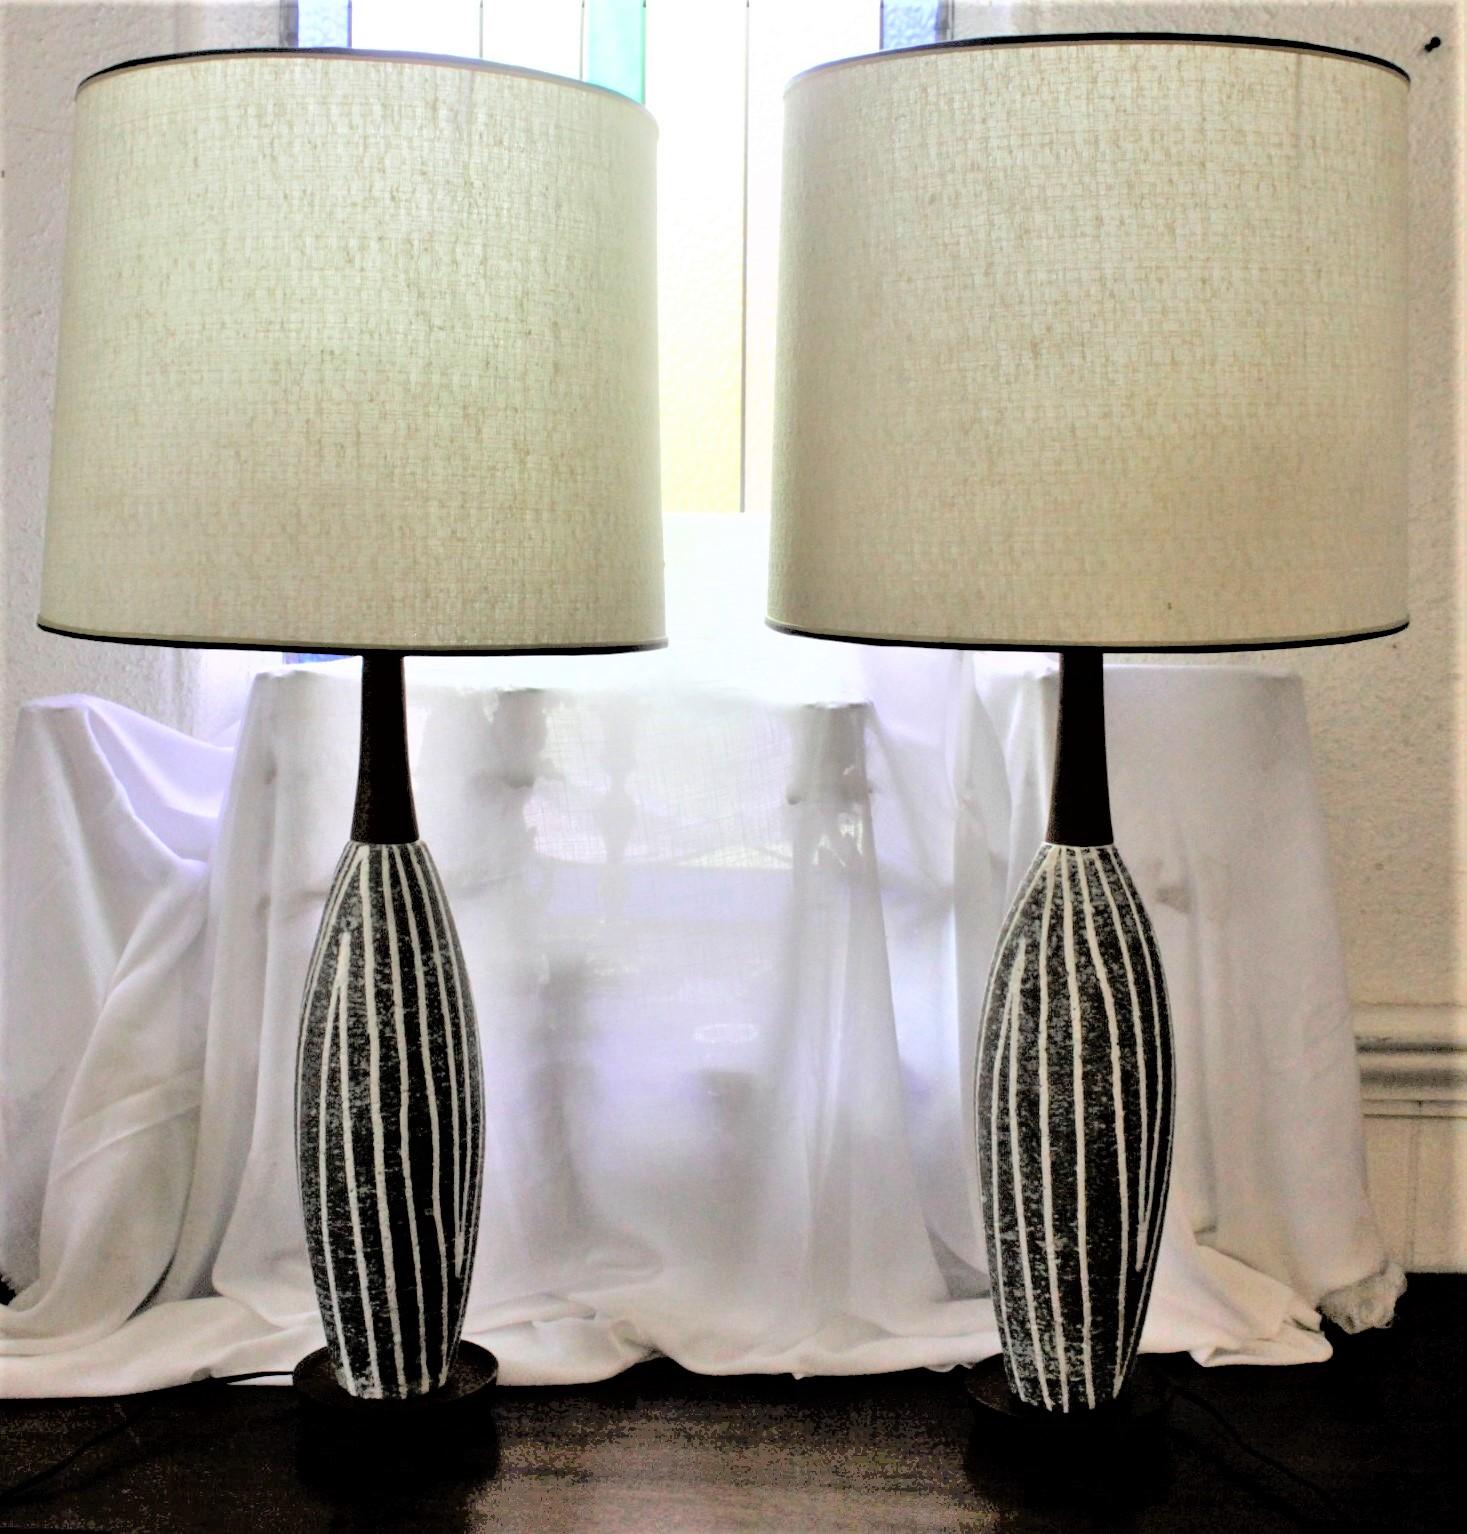 Hand-Crafted Pair of Upsala Ekeby Mid-Century Modern Pottery Table Lamps & Original Shades For Sale